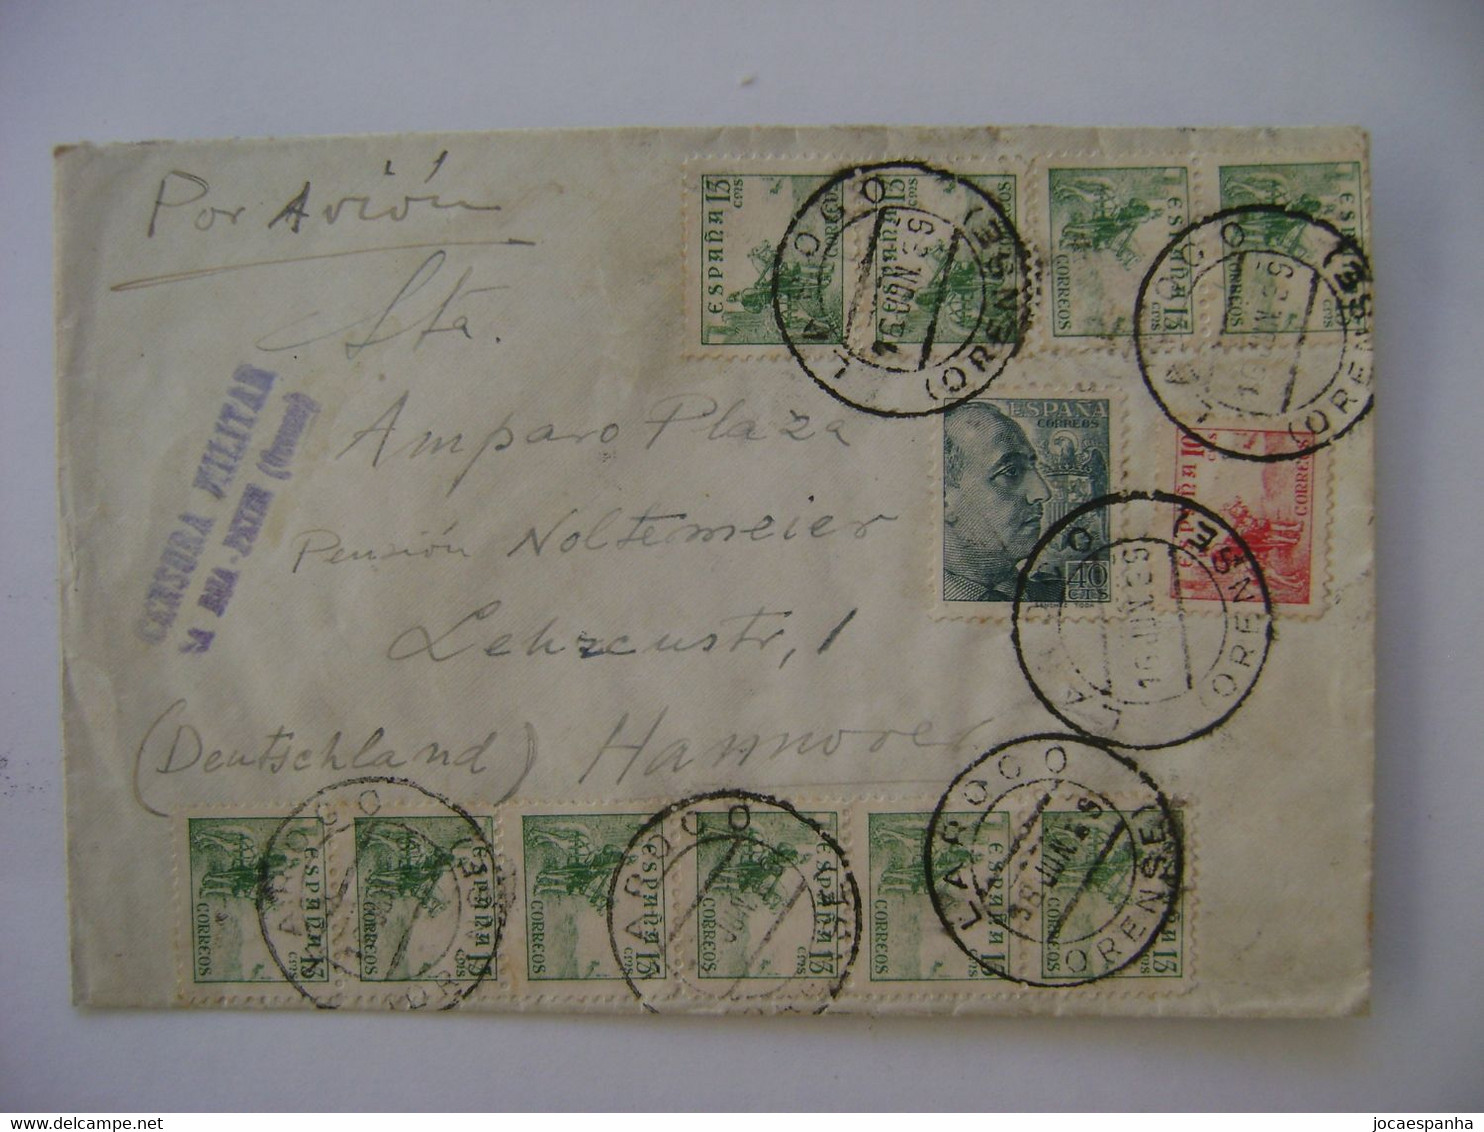 SPAIN / ESPANA - LETTER SENT FROM LAROCO (ORENSE) TO GERMANY STAMP MILITARY CENSORSHIP IN 1939 IN THE STATE - Usados